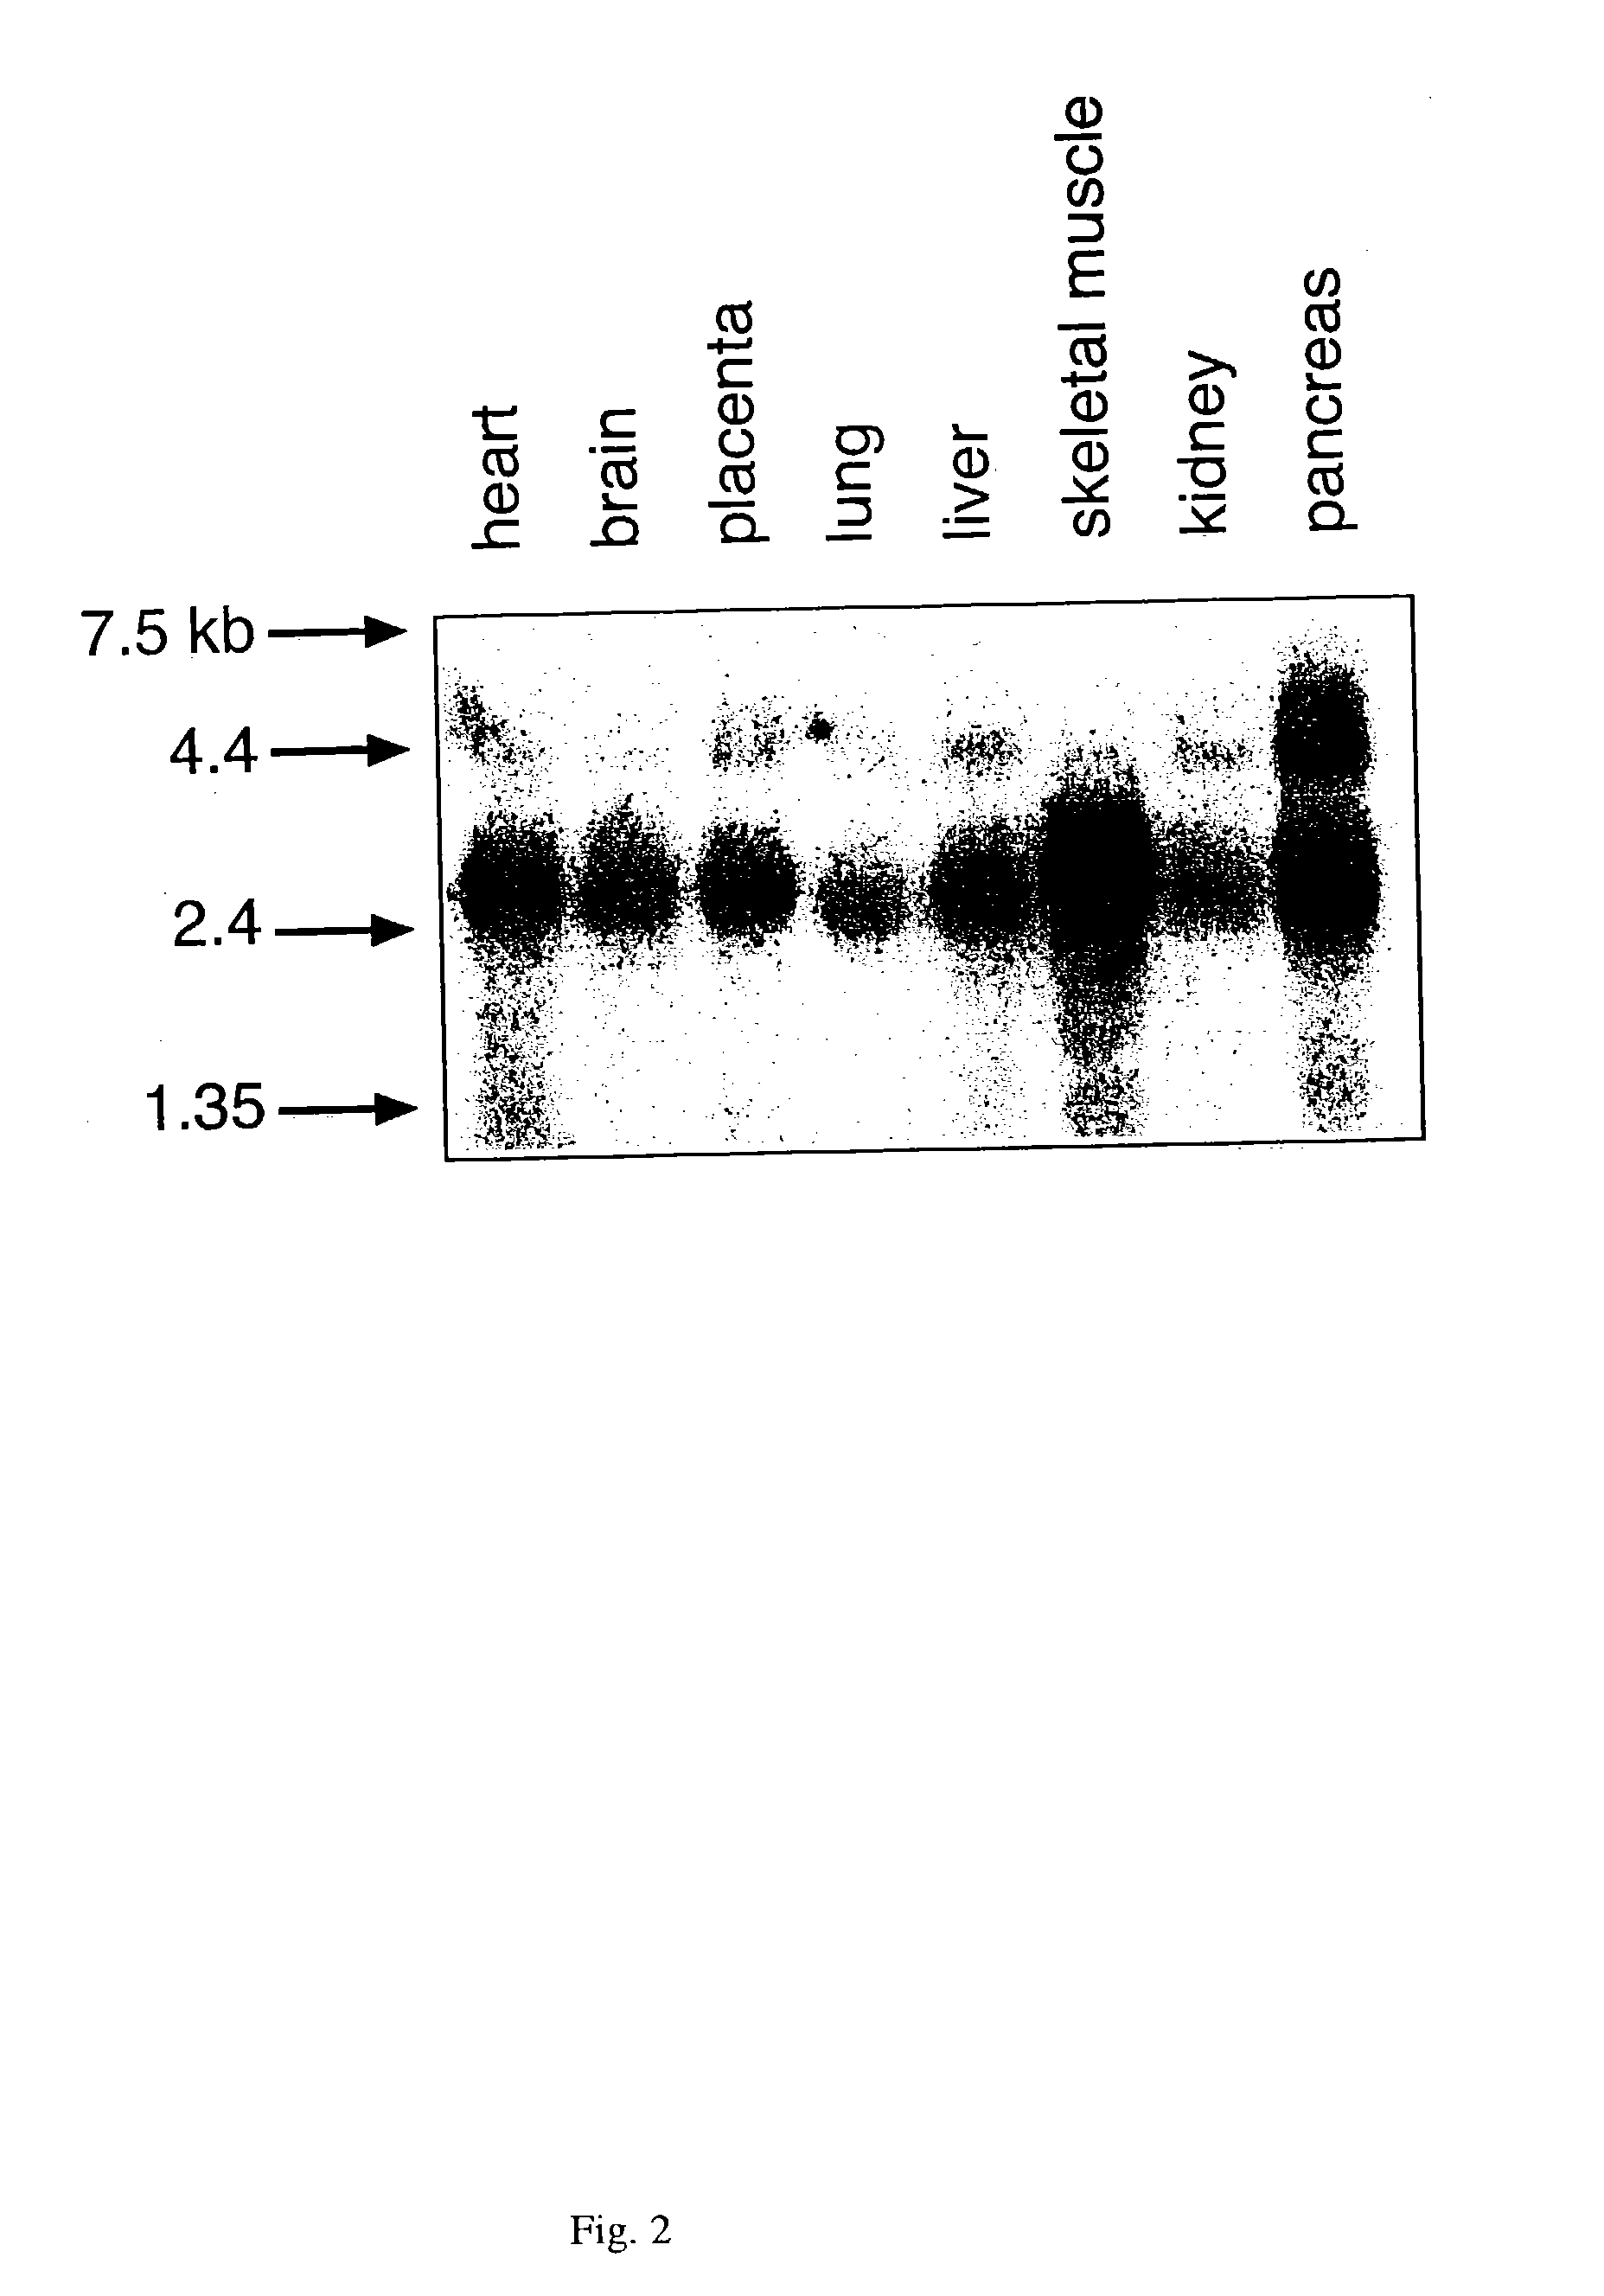 Antibodies immunologically specific for a DNA repair endonuclease and methods of use thereof